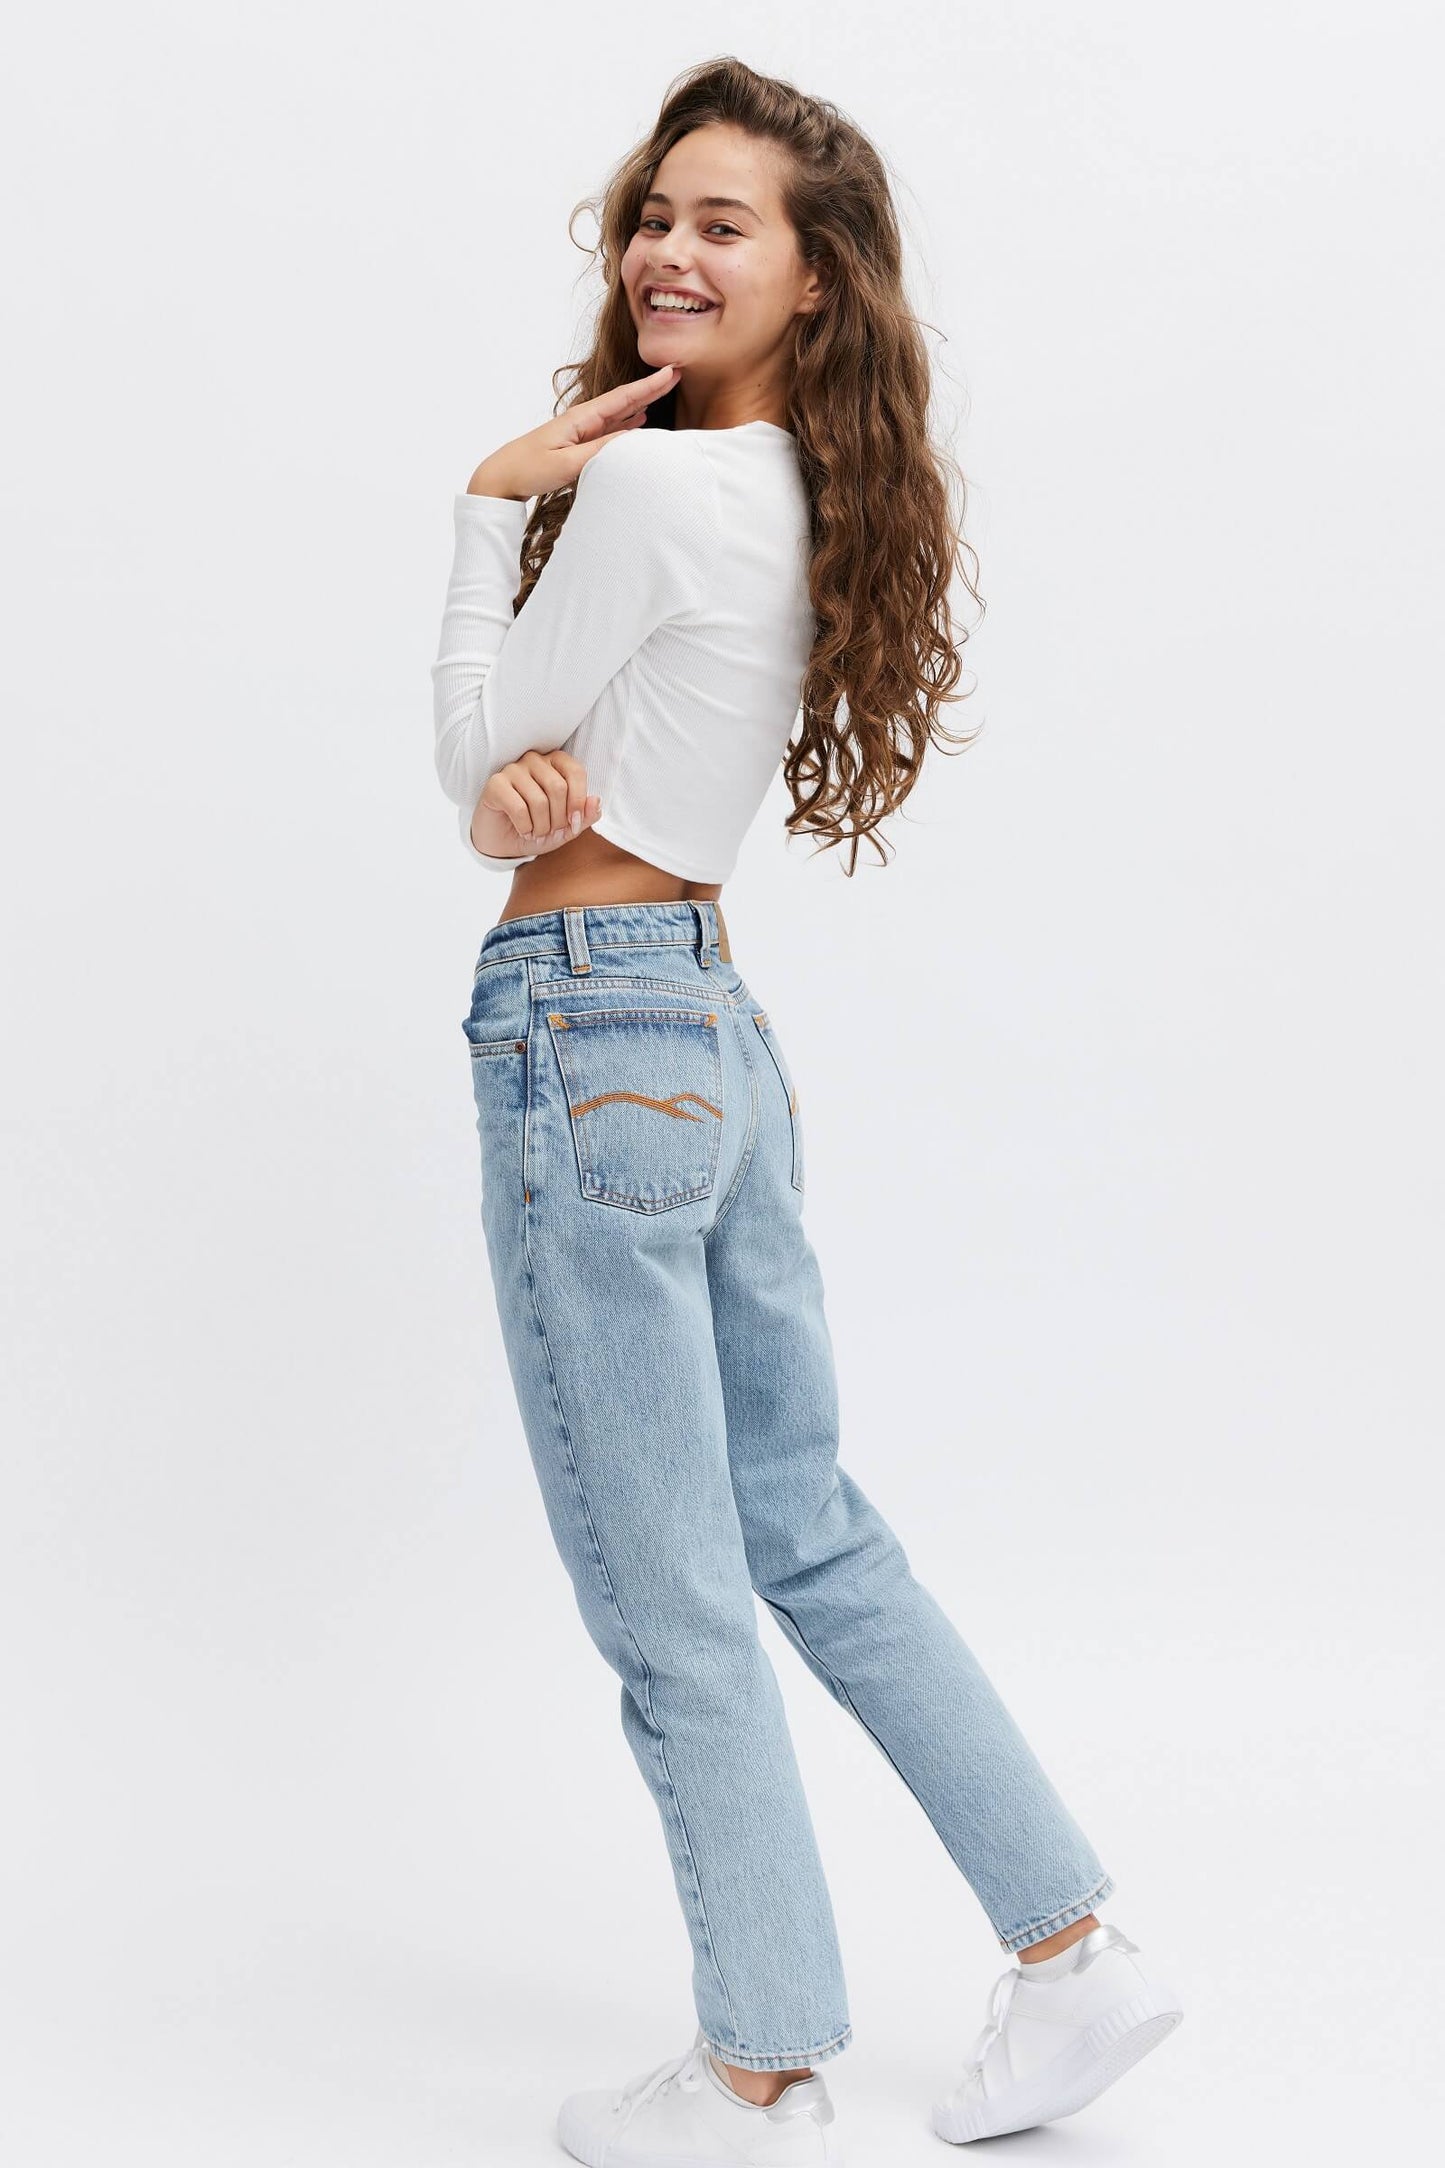 Original organic jeans for women. Light blue color and tapered fit 